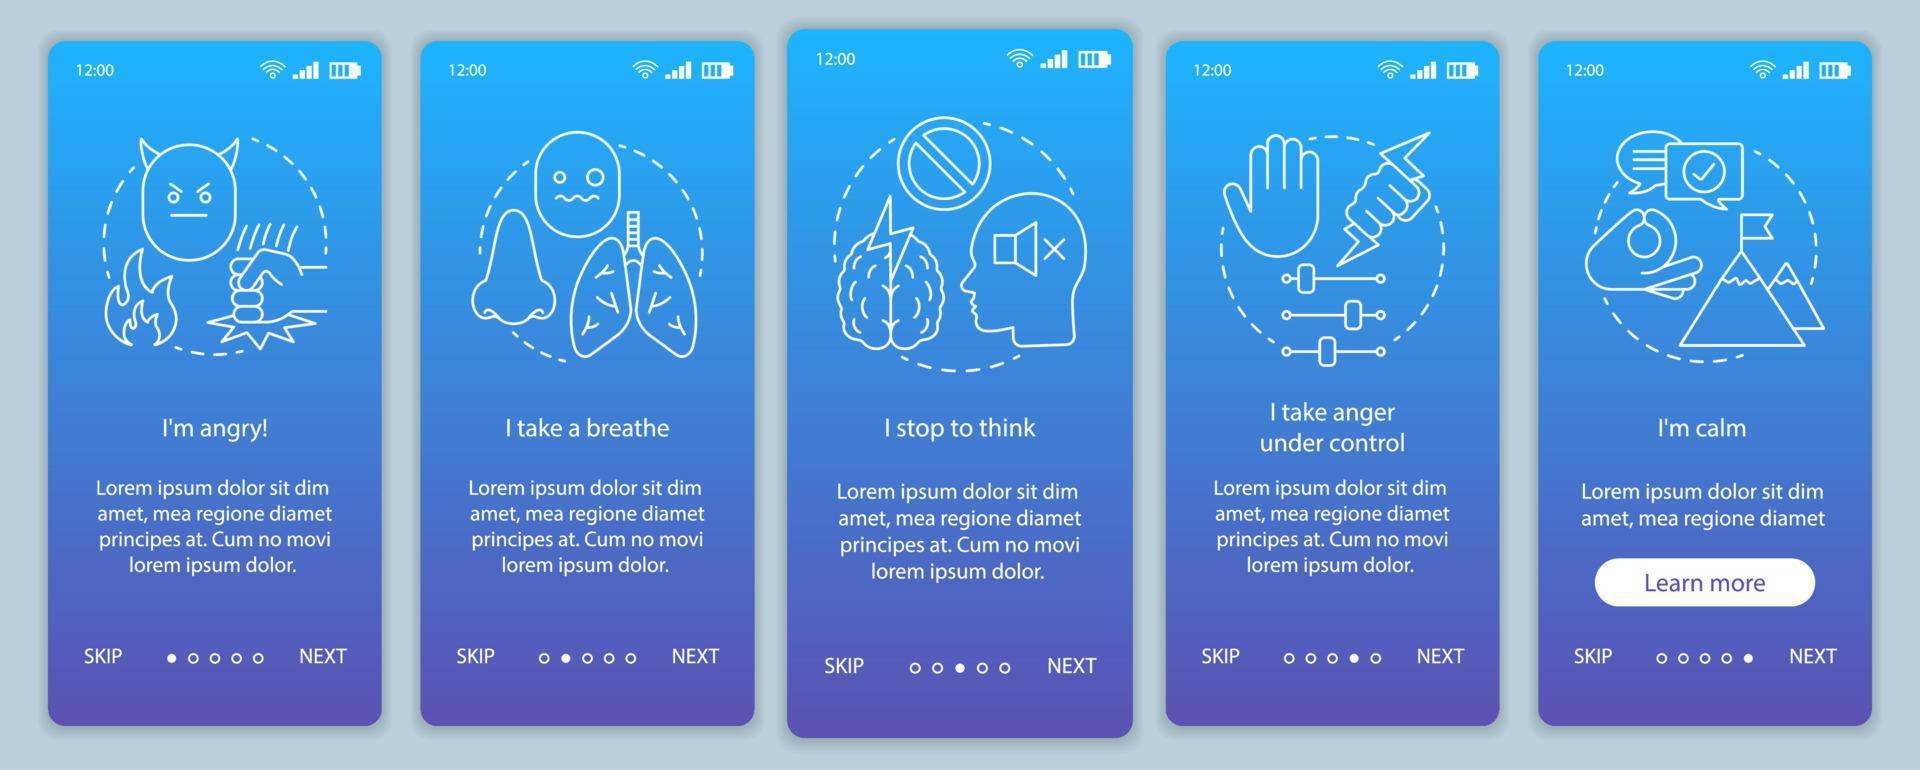 Anger management onboarding mobile app page screen vector template. Take a breath, stop to think, calm. Walkthrough website steps with linear illustrations. UX, UI, GUI smartphone interface concept